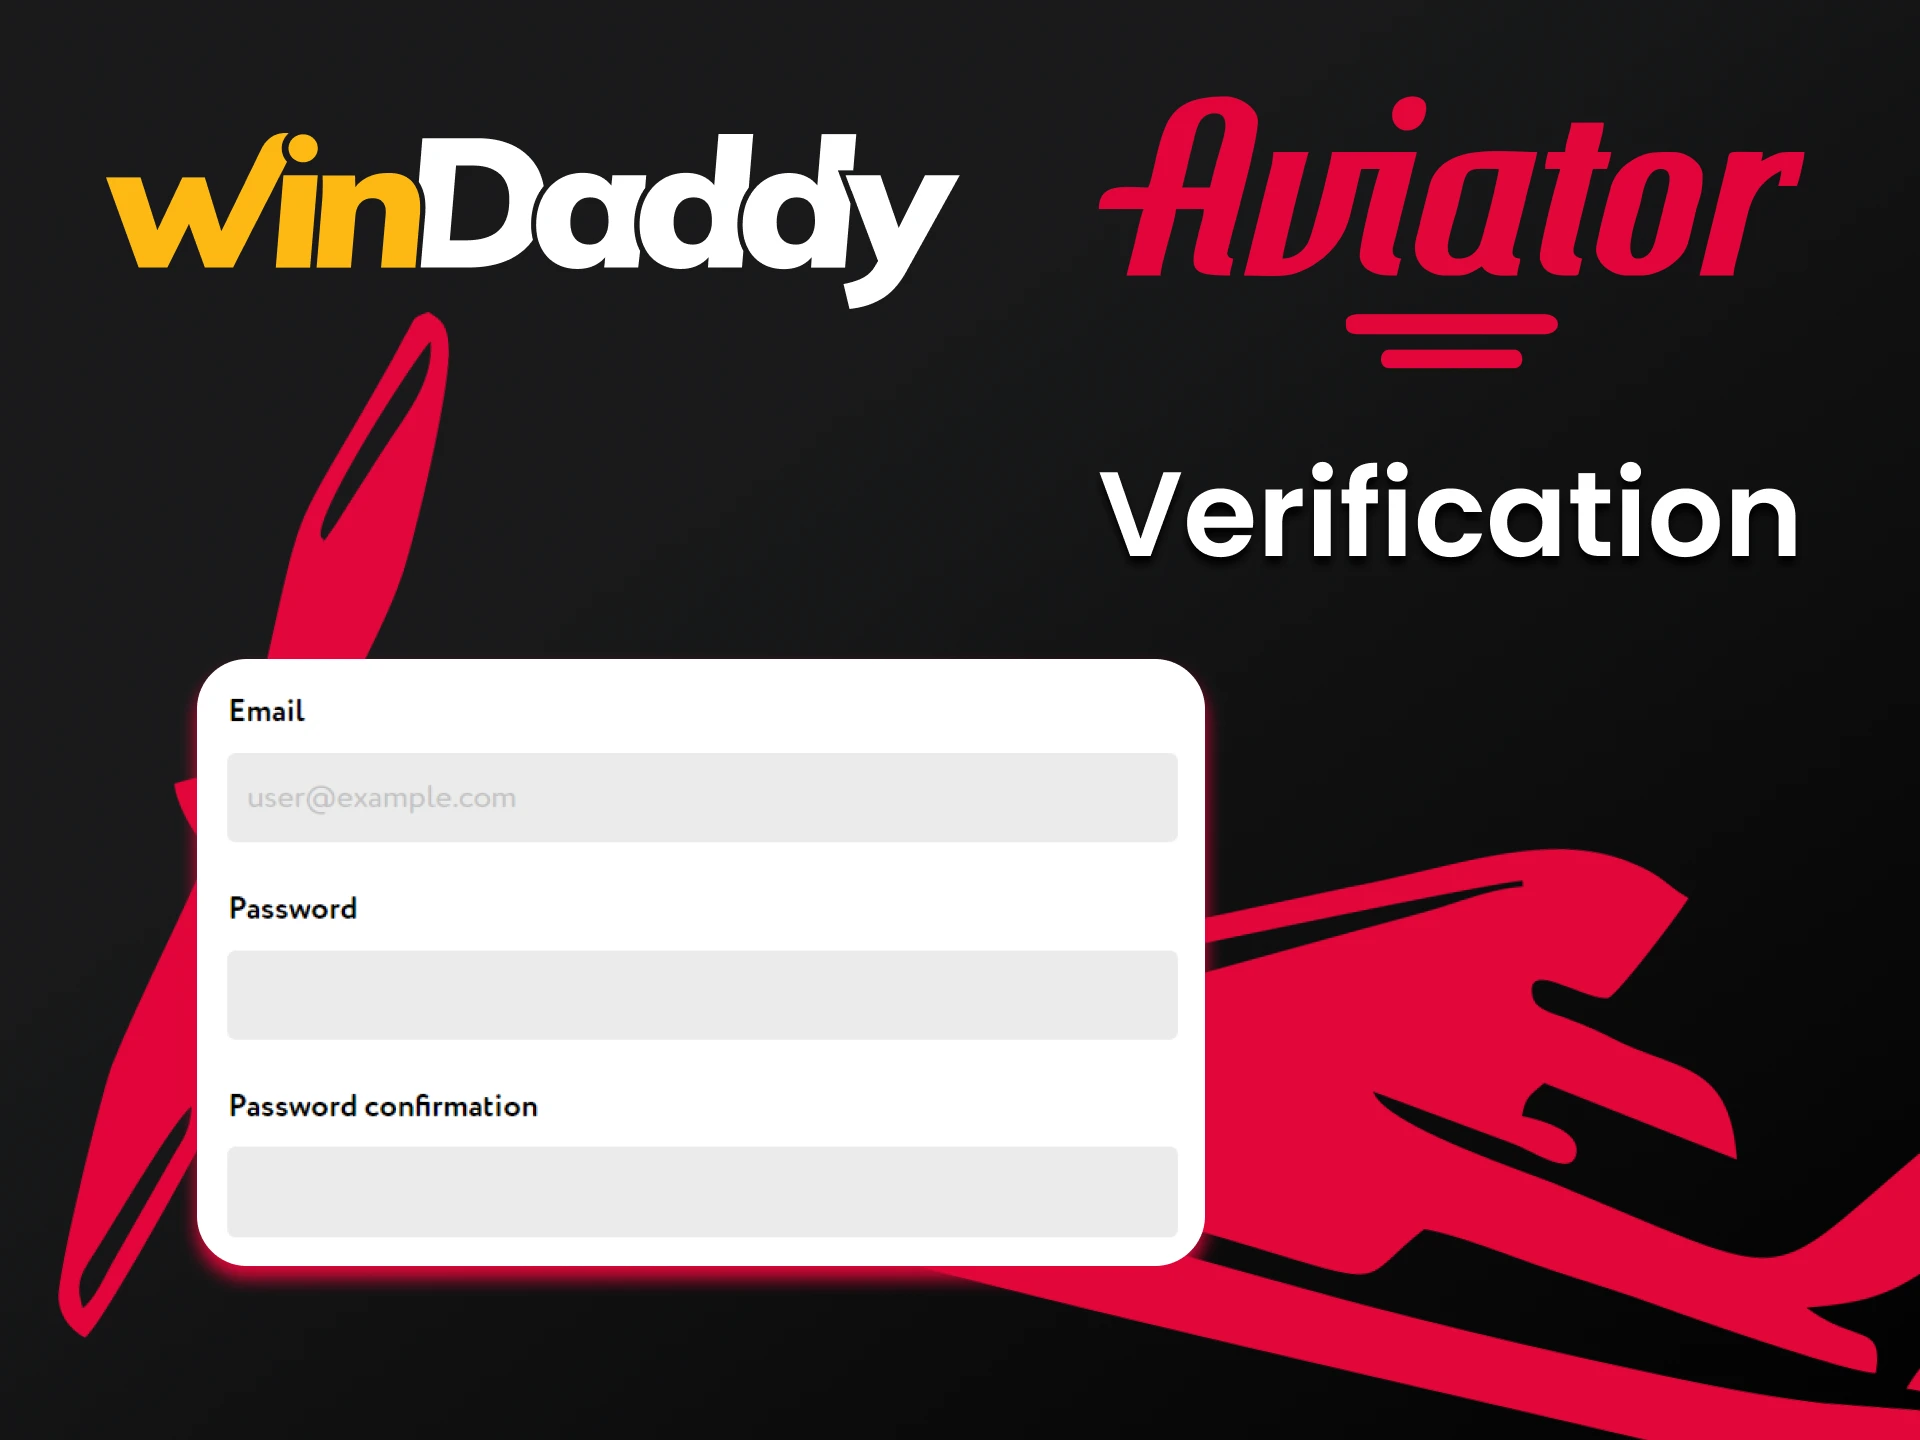 Fill in personal data for the WinDaddy service.